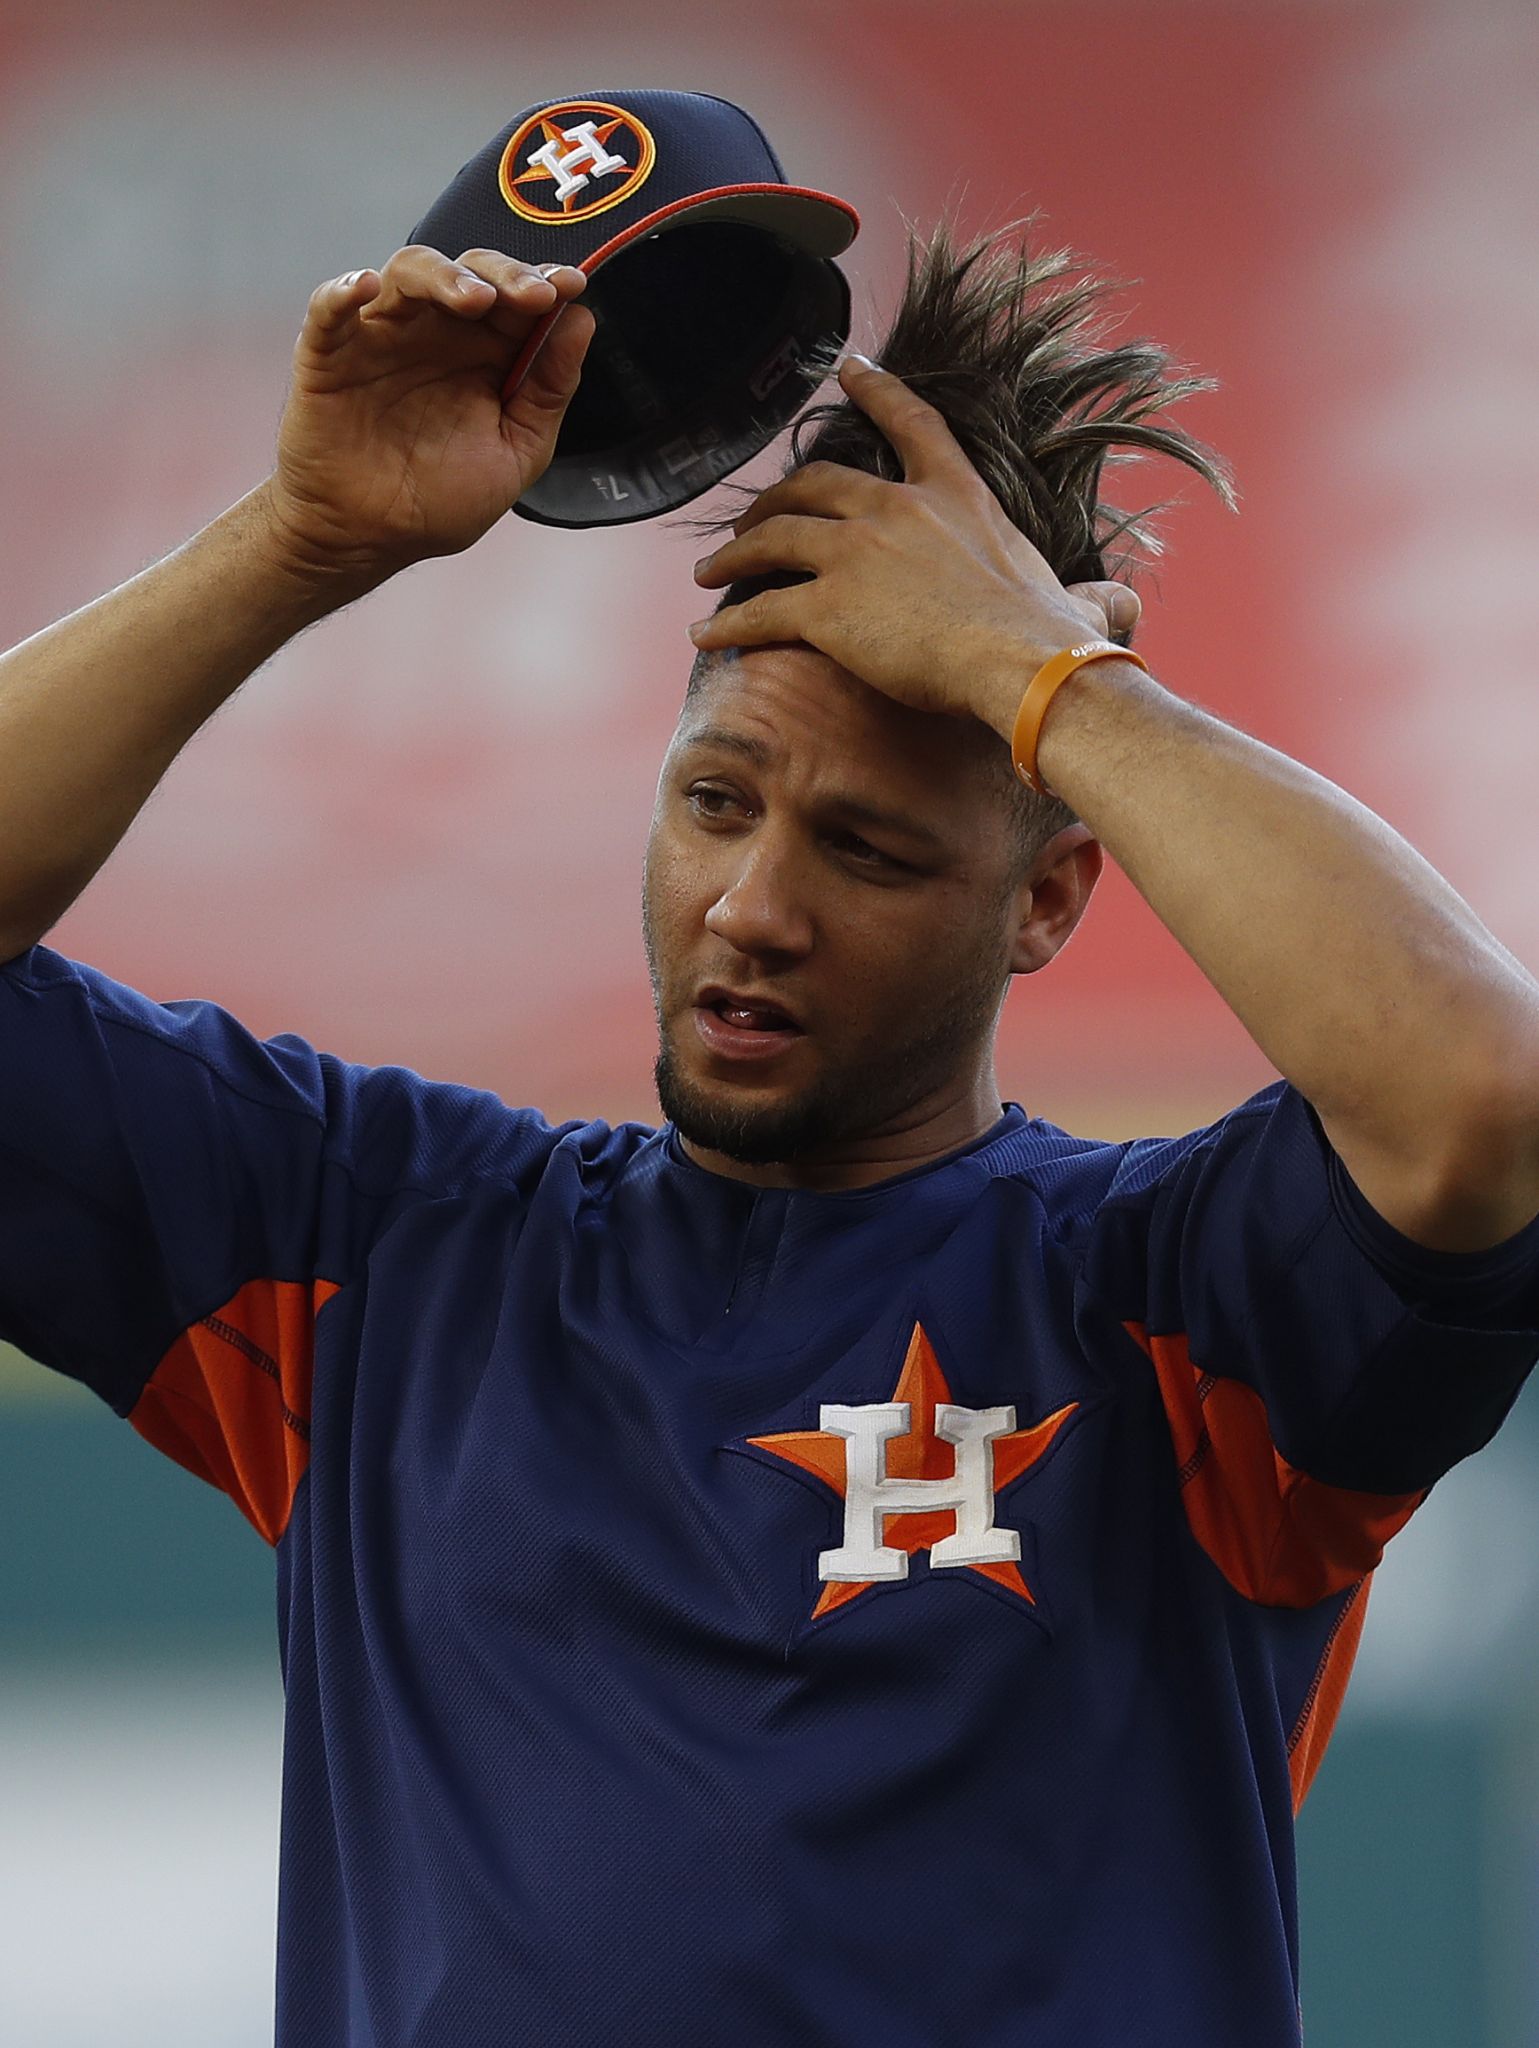 Guess the Astros player by their haircut